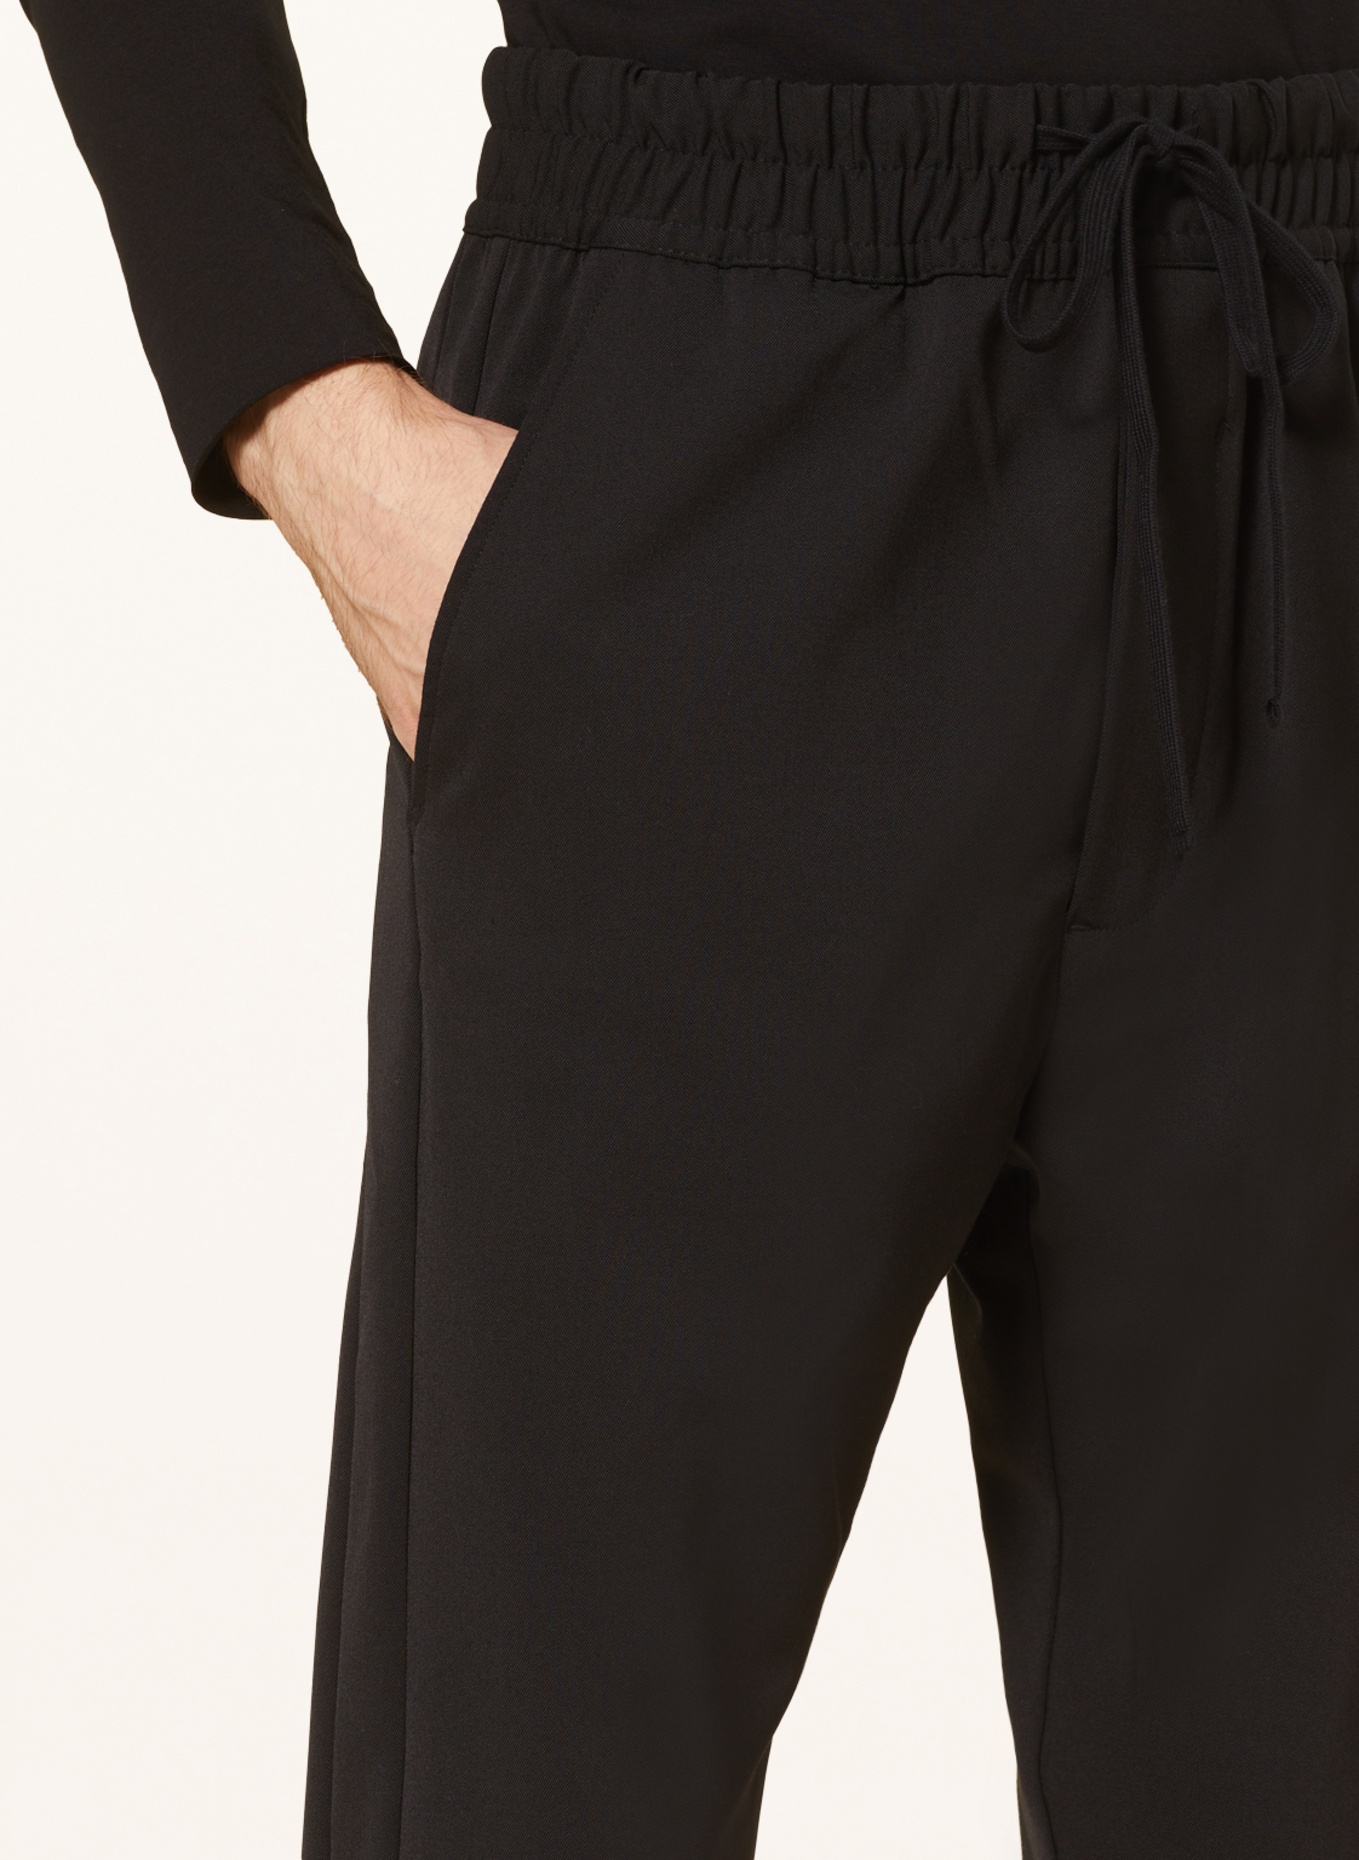 thom/krom Pants in jogger style slim fit, Color: BLACK (Image 5)